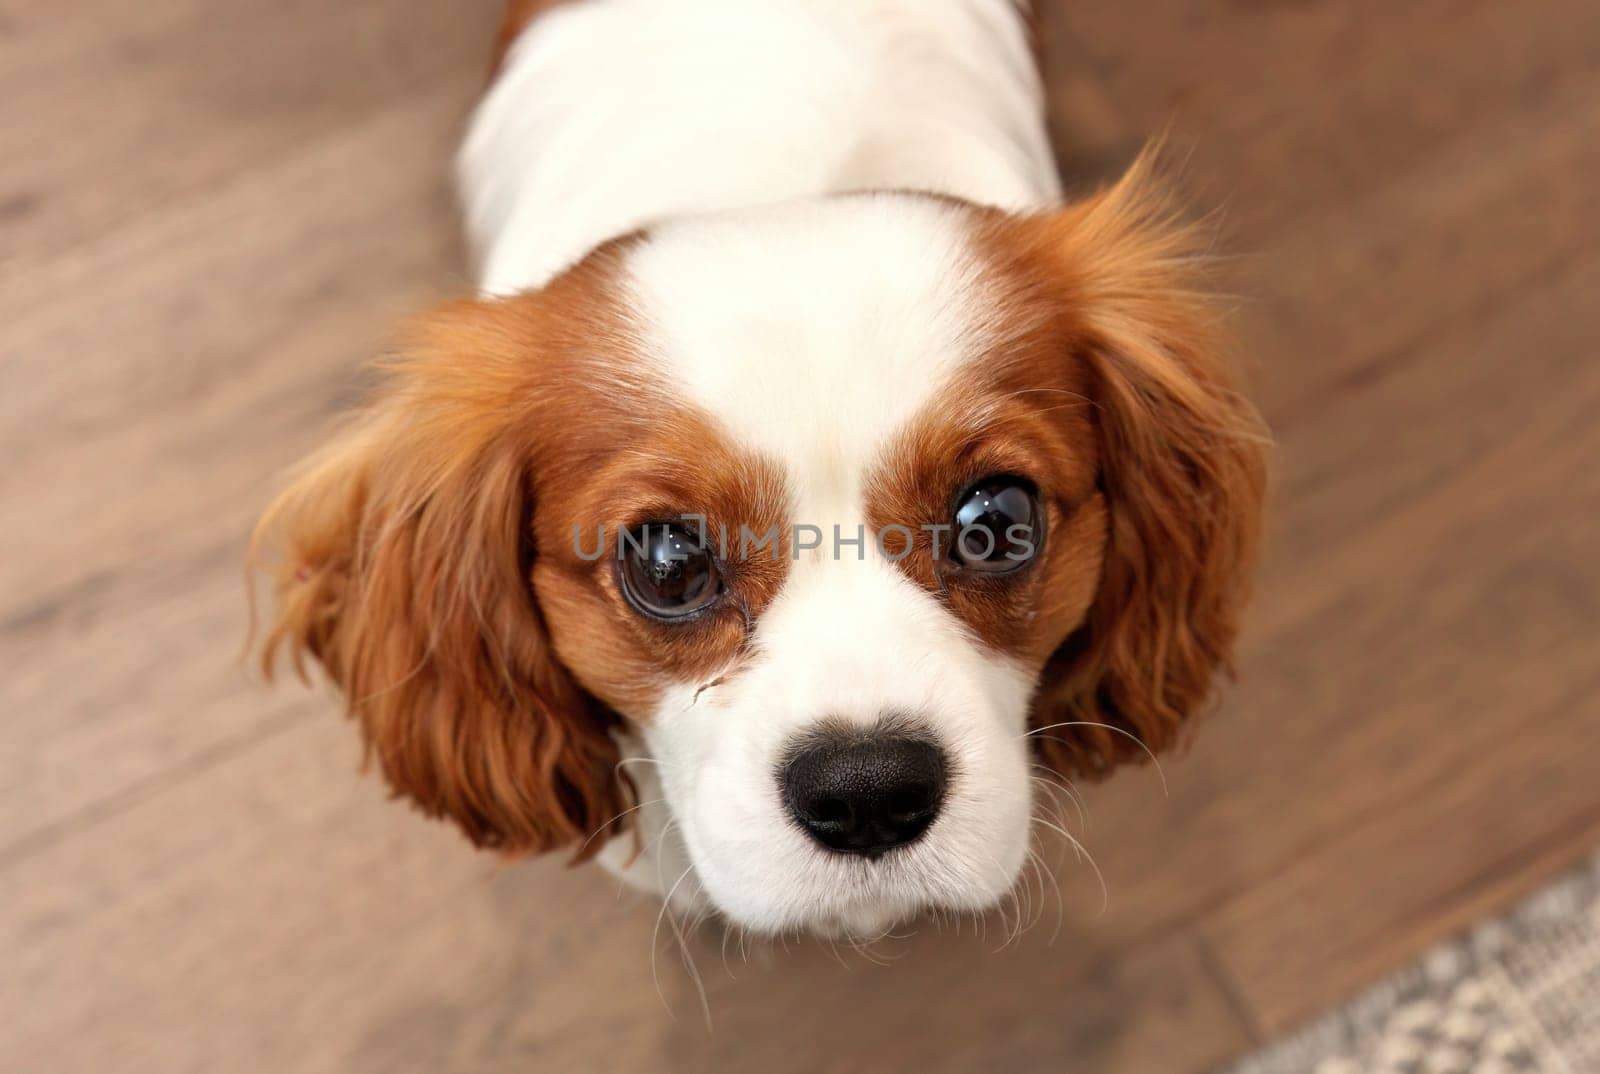 Close up of Adorable Cavalier King Charles Spaniel with corneal ulcer eye injury looking up by markvandam